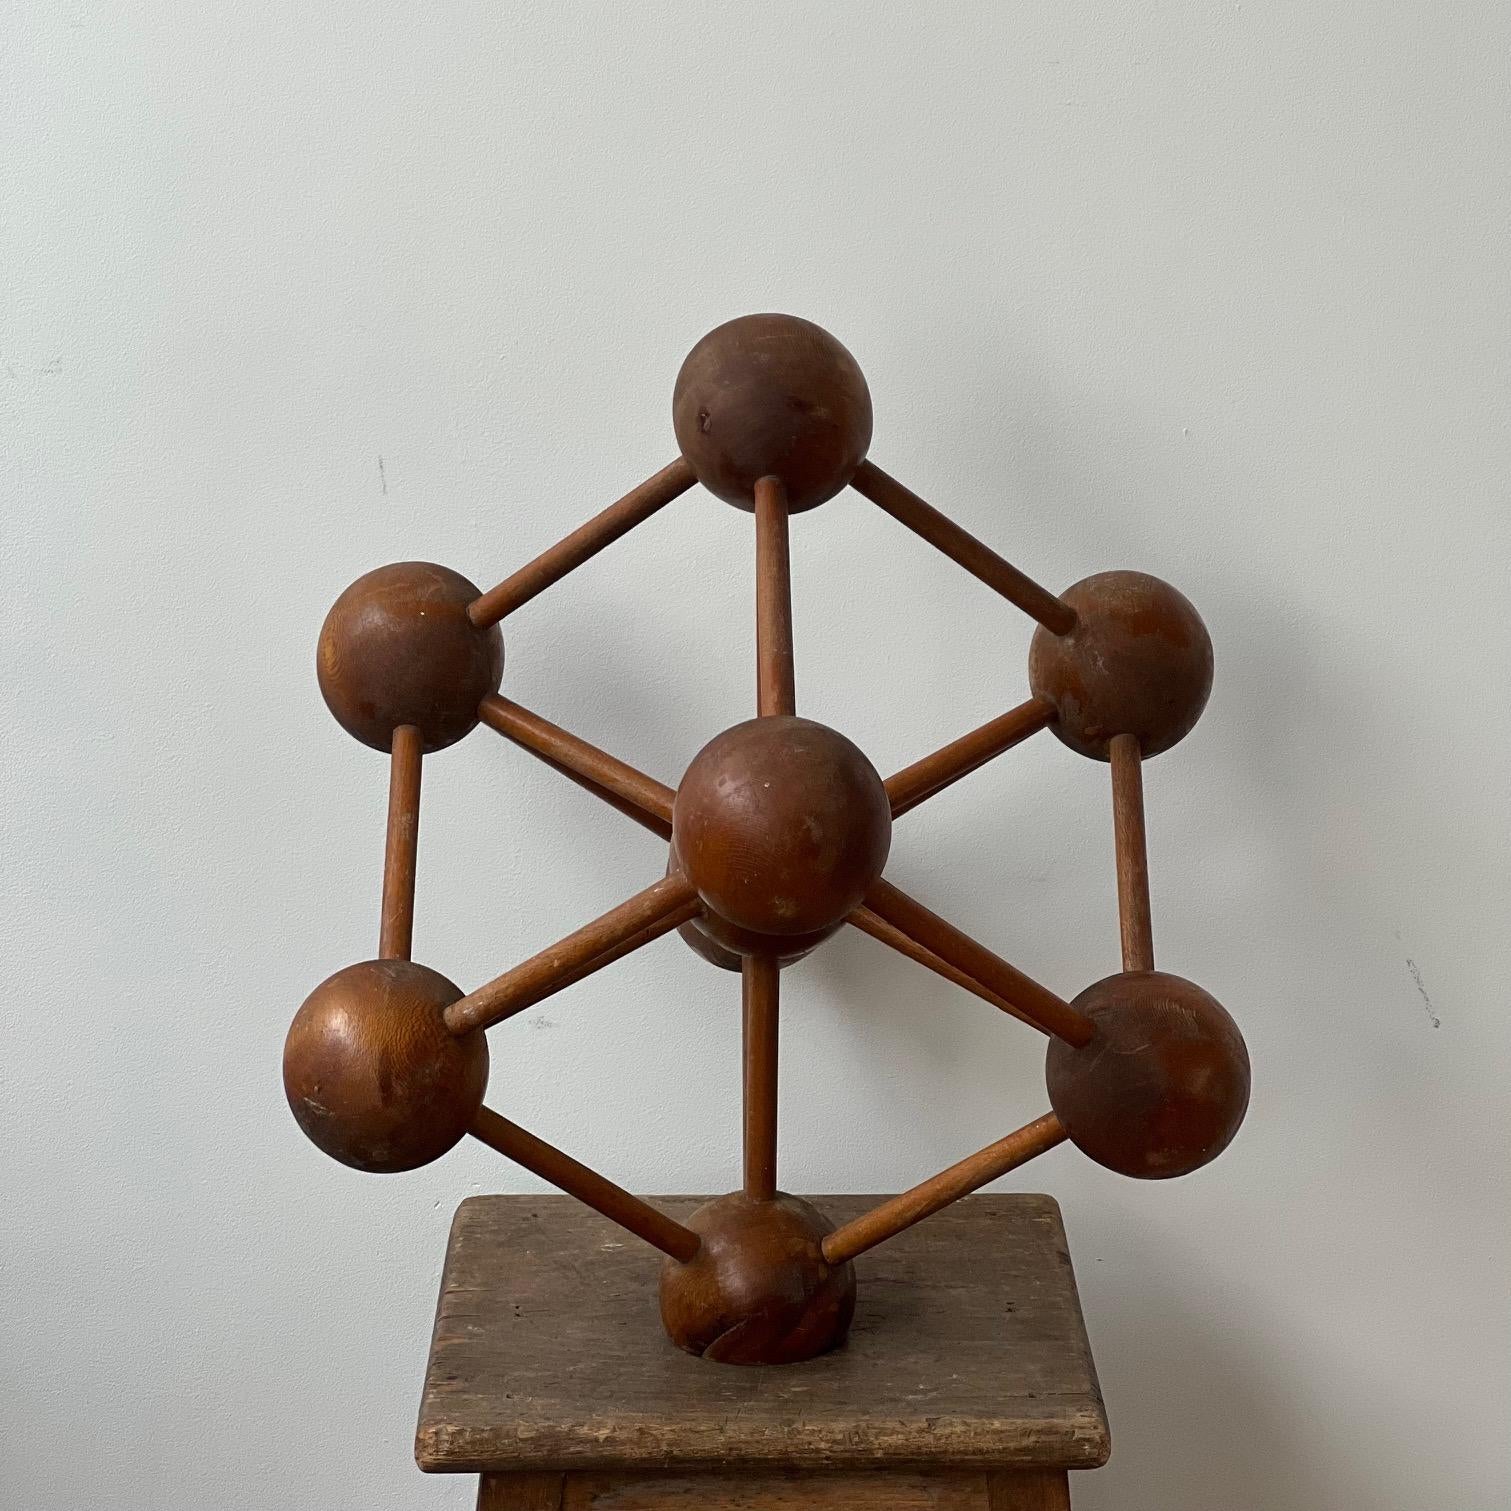 A wooden geometric model believed to be an homage to the Brussels Atomium building. 

Belgium, c1960s. 

Ideal as a desktop display or shelf curio.

Unusually created out of wood and much larger than the usual smaller metal or plastic models.